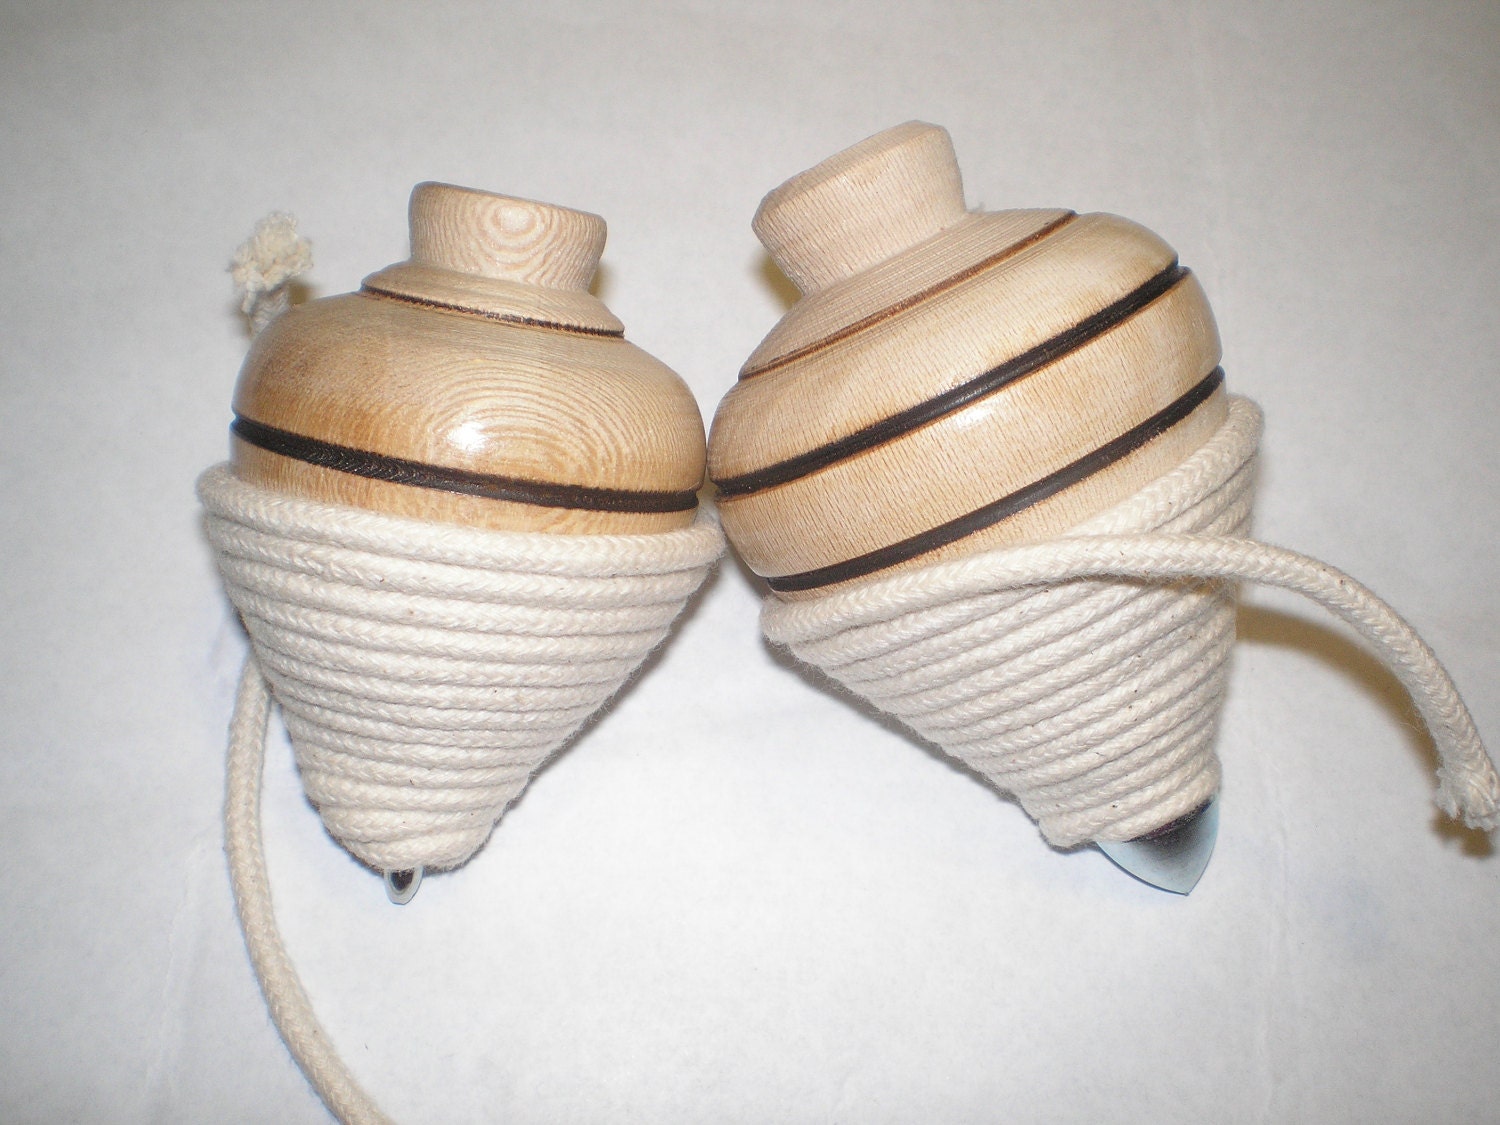 Toys-Two Wooden Spinning Tops Two Traditional wood spinning